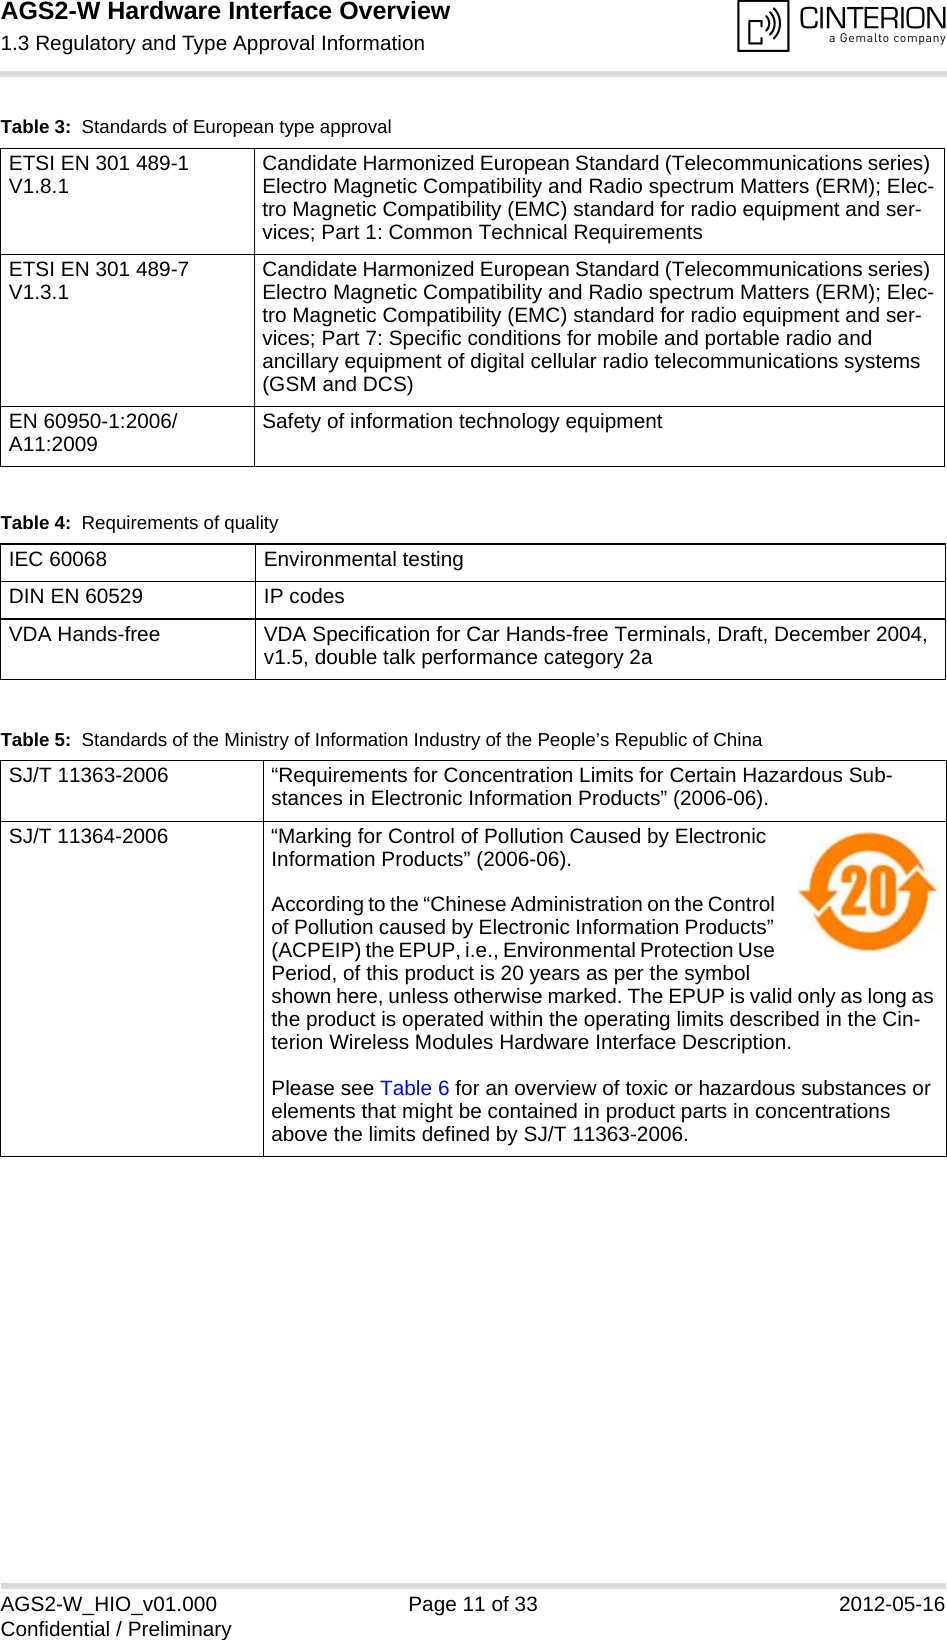 AGS2-W Hardware Interface Overview1.3 Regulatory and Type Approval Information14AGS2-W_HIO_v01.000 Page 11 of 33 2012-05-16Confidential / PreliminaryETSI EN 301 489-1 V1.8.1 Candidate Harmonized European Standard (Telecommunications series) Electro Magnetic Compatibility and Radio spectrum Matters (ERM); Elec-tro Magnetic Compatibility (EMC) standard for radio equipment and ser-vices; Part 1: Common Technical RequirementsETSI EN 301 489-7 V1.3.1 Candidate Harmonized European Standard (Telecommunications series) Electro Magnetic Compatibility and Radio spectrum Matters (ERM); Elec-tro Magnetic Compatibility (EMC) standard for radio equipment and ser-vices; Part 7: Specific conditions for mobile and portable radio and ancillary equipment of digital cellular radio telecommunications systems (GSM and DCS)EN 60950-1:2006/A11:2009 Safety of information technology equipmentTable 4:  Requirements of qualityIEC 60068 Environmental testingDIN EN 60529 IP codesVDA Hands-free VDA Specification for Car Hands-free Terminals, Draft, December 2004, v1.5, double talk performance category 2aTable 5:  Standards of the Ministry of Information Industry of the People’s Republic of ChinaSJ/T 11363-2006  “Requirements for Concentration Limits for Certain Hazardous Sub-stances in Electronic Information Products” (2006-06).SJ/T 11364-2006 “Marking for Control of Pollution Caused by Electronic Information Products” (2006-06).According to the “Chinese Administration on the Control of Pollution caused by Electronic Information Products” (ACPEIP) the EPUP, i.e., Environmental Protection Use Period, of this product is 20 years as per the symbol shown here, unless otherwise marked. The EPUP is valid only as long as the product is operated within the operating limits described in the Cin-terion Wireless Modules Hardware Interface Description.Please see Table 6 for an overview of toxic or hazardous substances or elements that might be contained in product parts in concentrations above the limits defined by SJ/T 11363-2006. Table 3:  Standards of European type approval